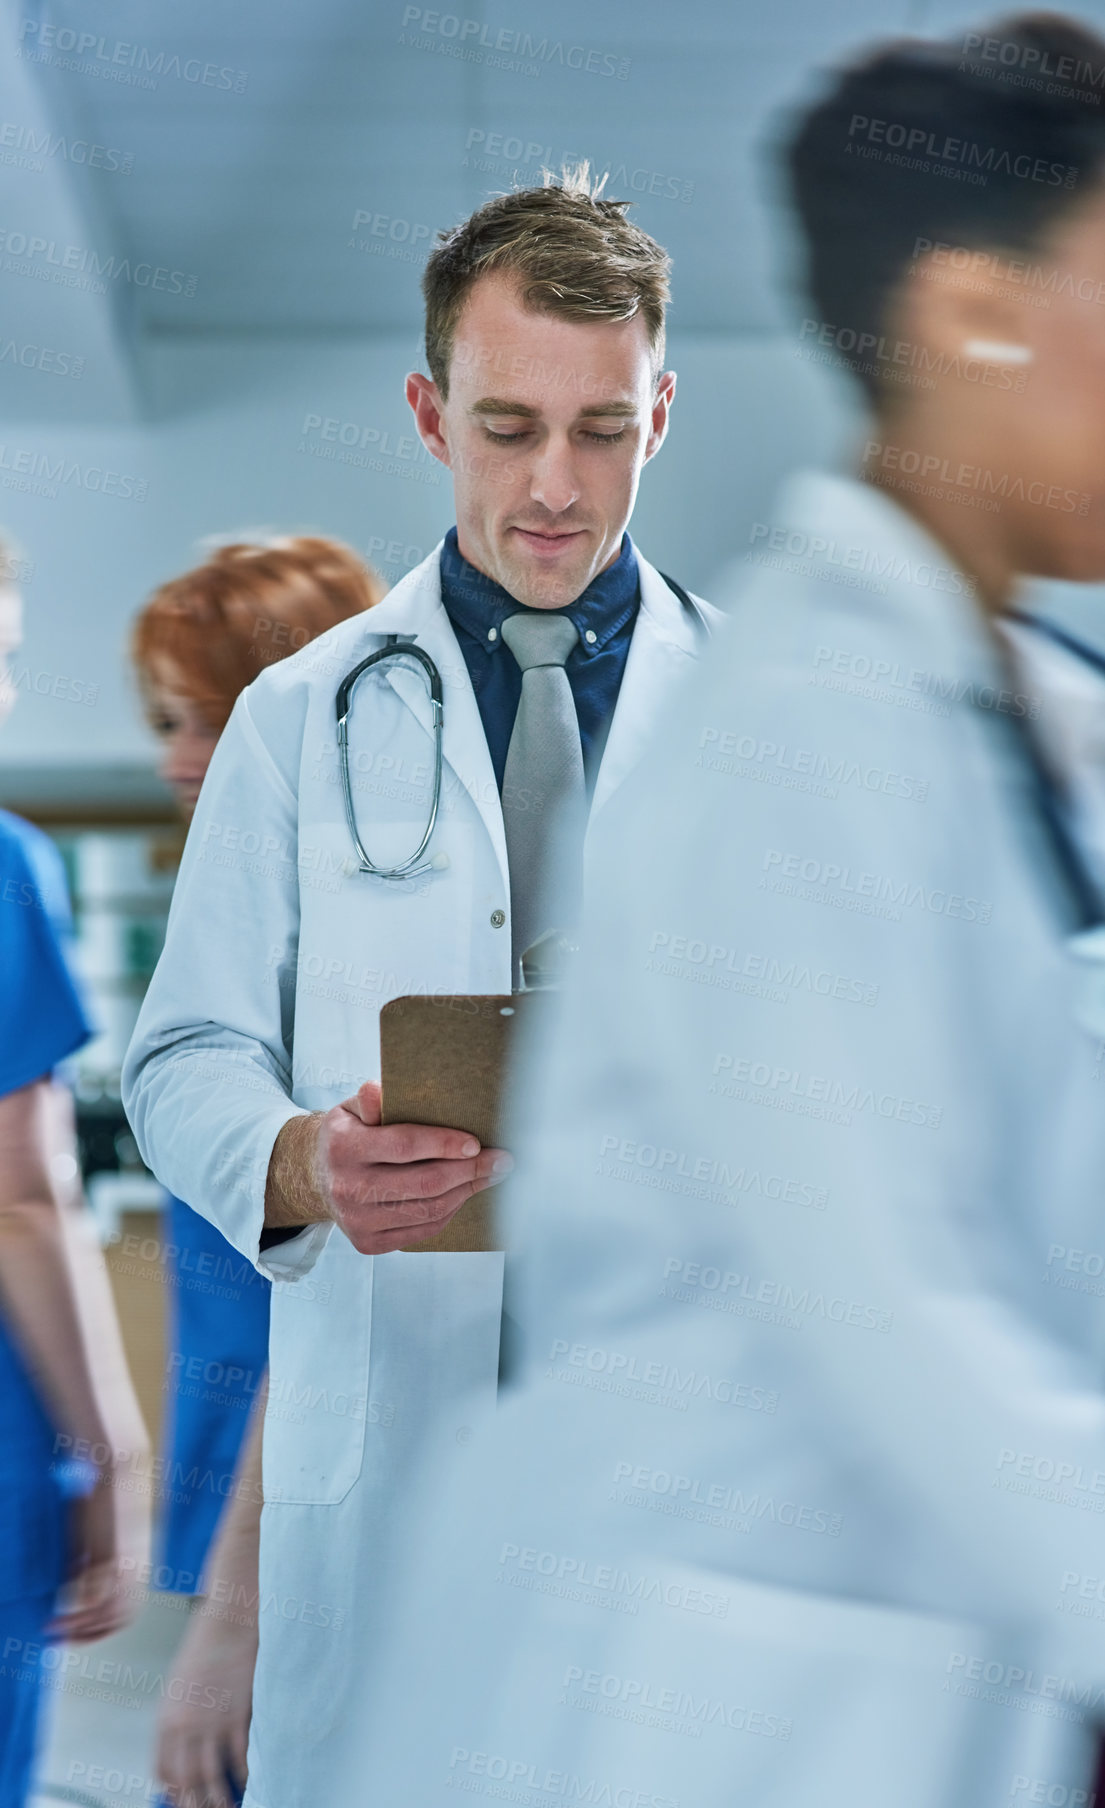 Buy stock photo Shot of a young doctor reading the contents of a patient’s file in a busy hospital